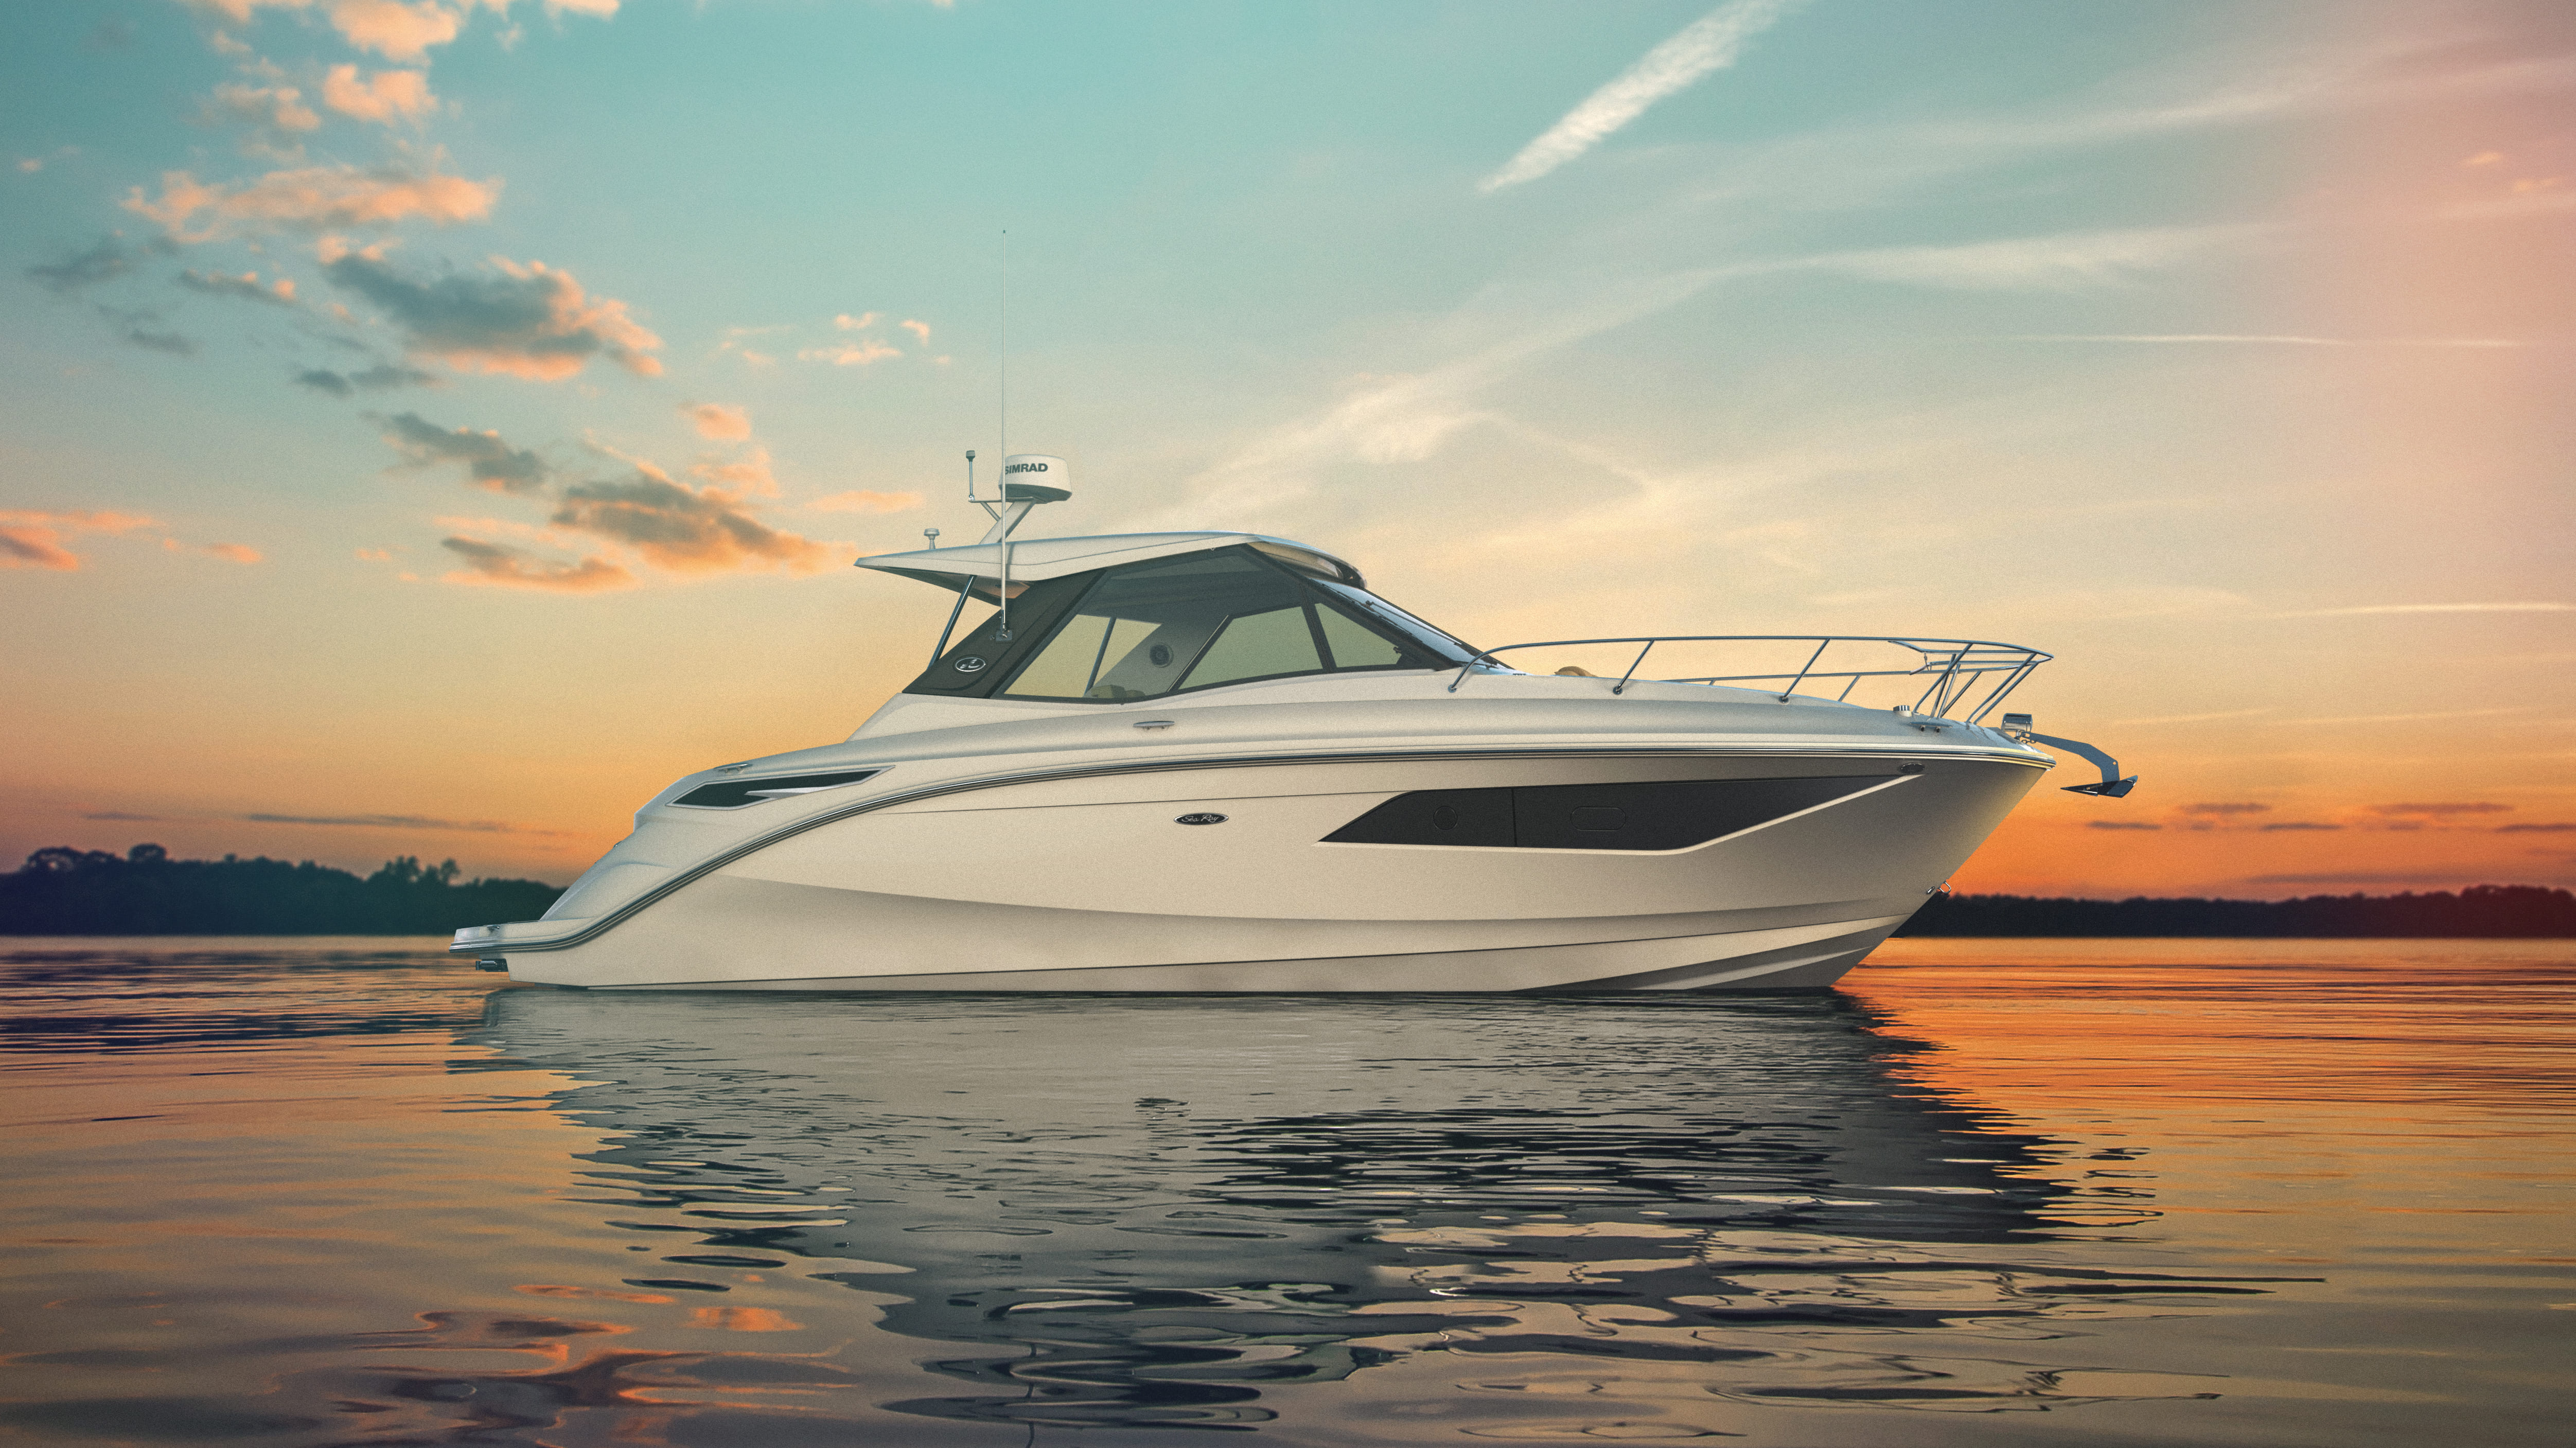 The new Sea Ray Sundancer 320 Coupe is ready for immediate delivery!